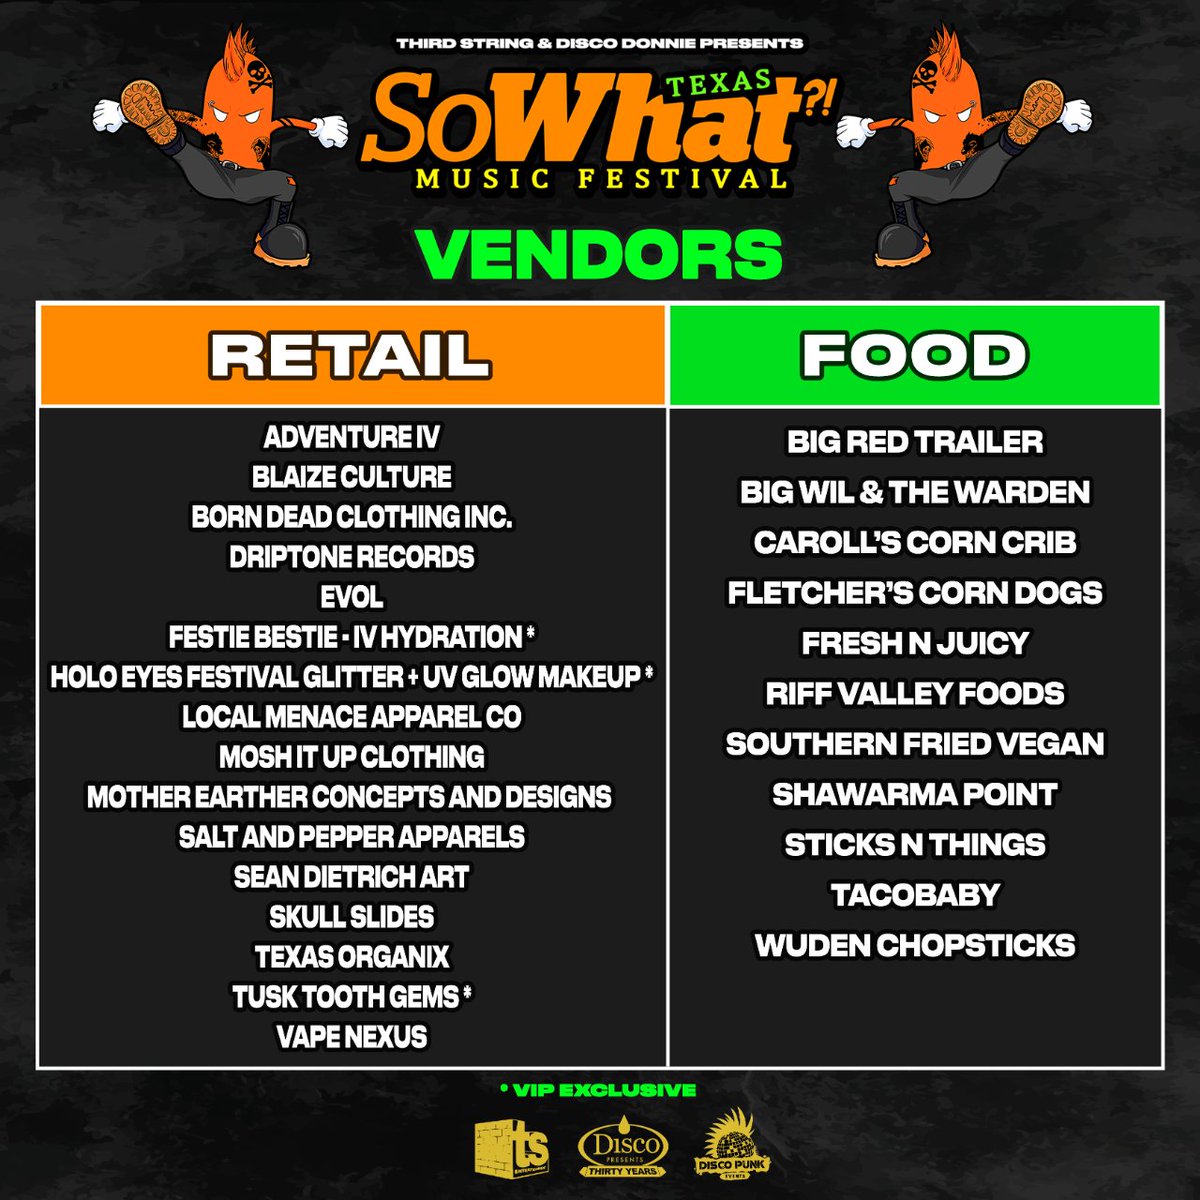 🤠 VENDOR WORLD - grab some sick new threads, a vinyl, and some sustenance from these retail and food vendors during your time at So What?!  Vegan and vegetarian food options are available.  sowhatmusicfestival.com